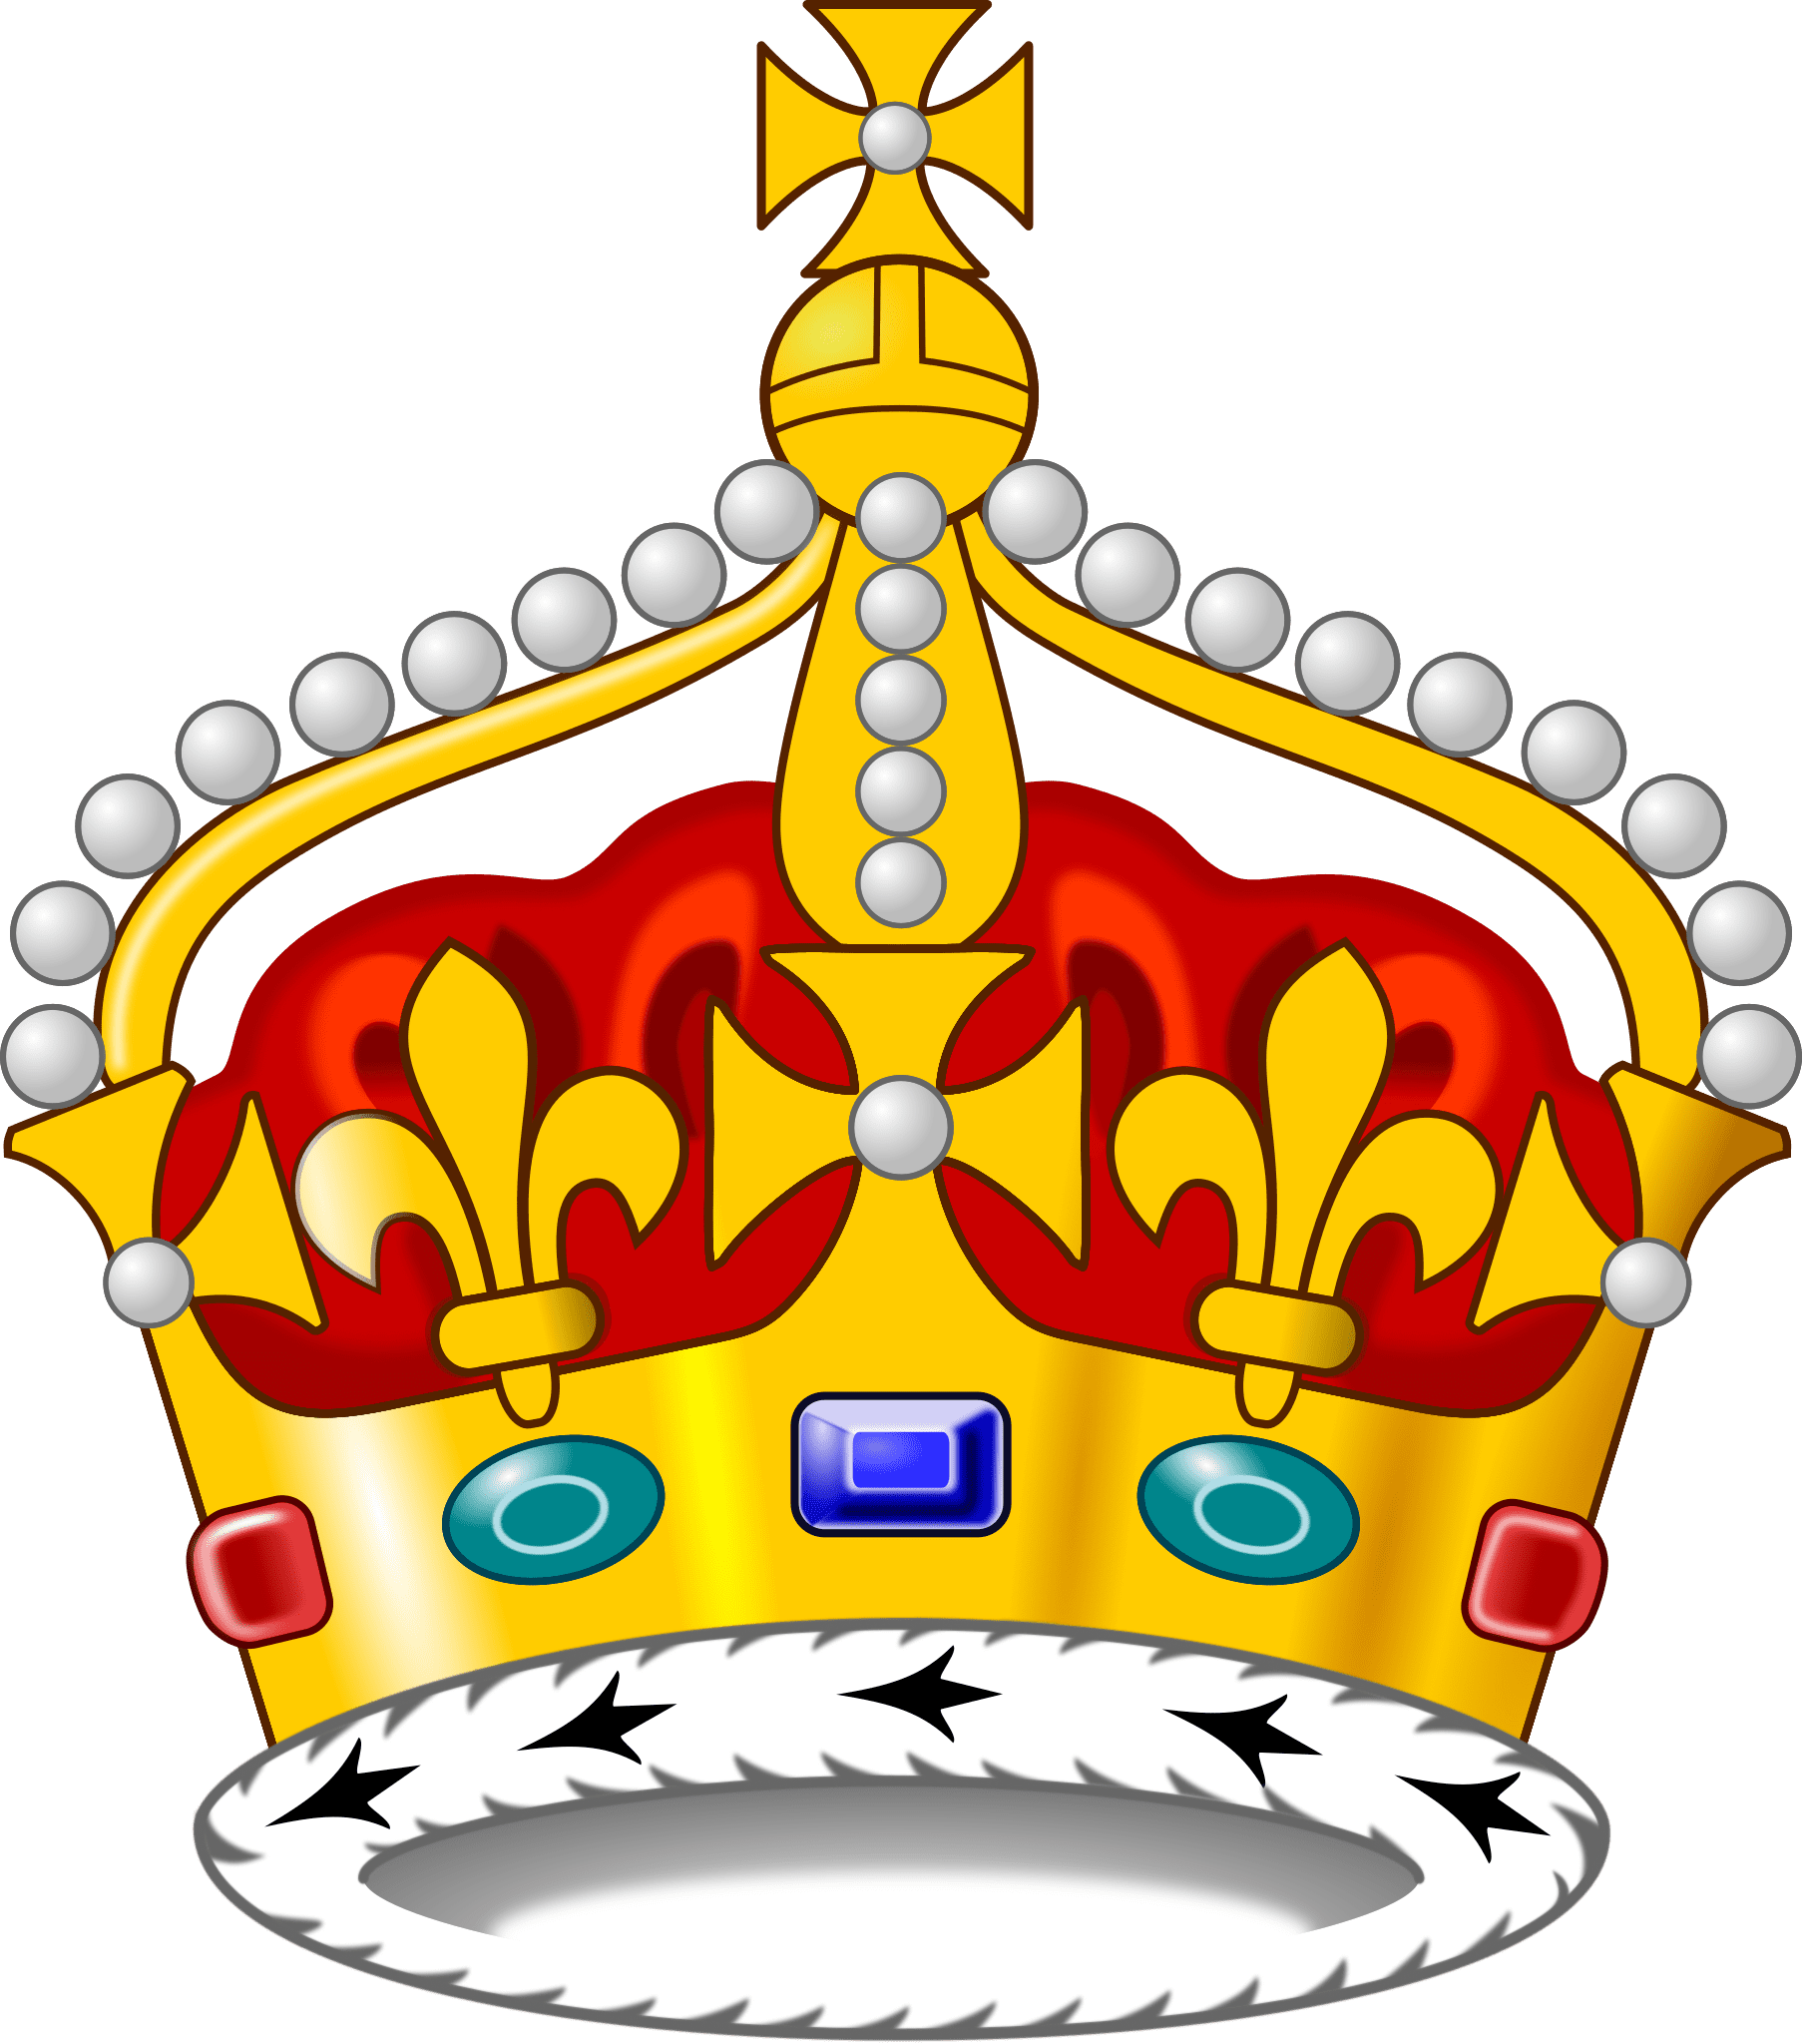 Queen crown united kingdom commons clipart free